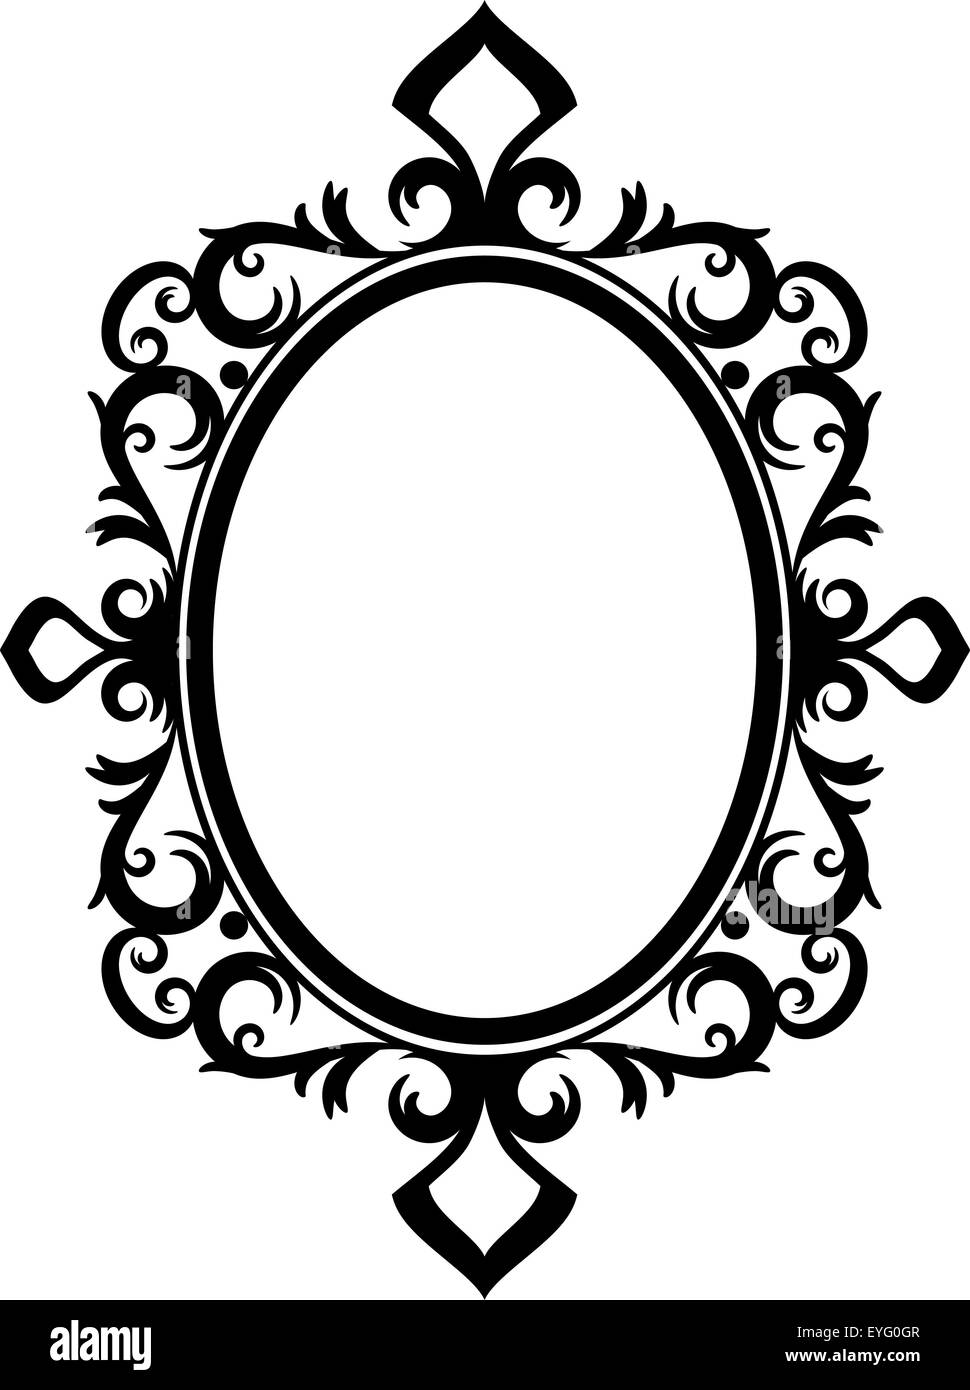 Decorative frame. Silhouette on a white background Stock Photo - Alamy